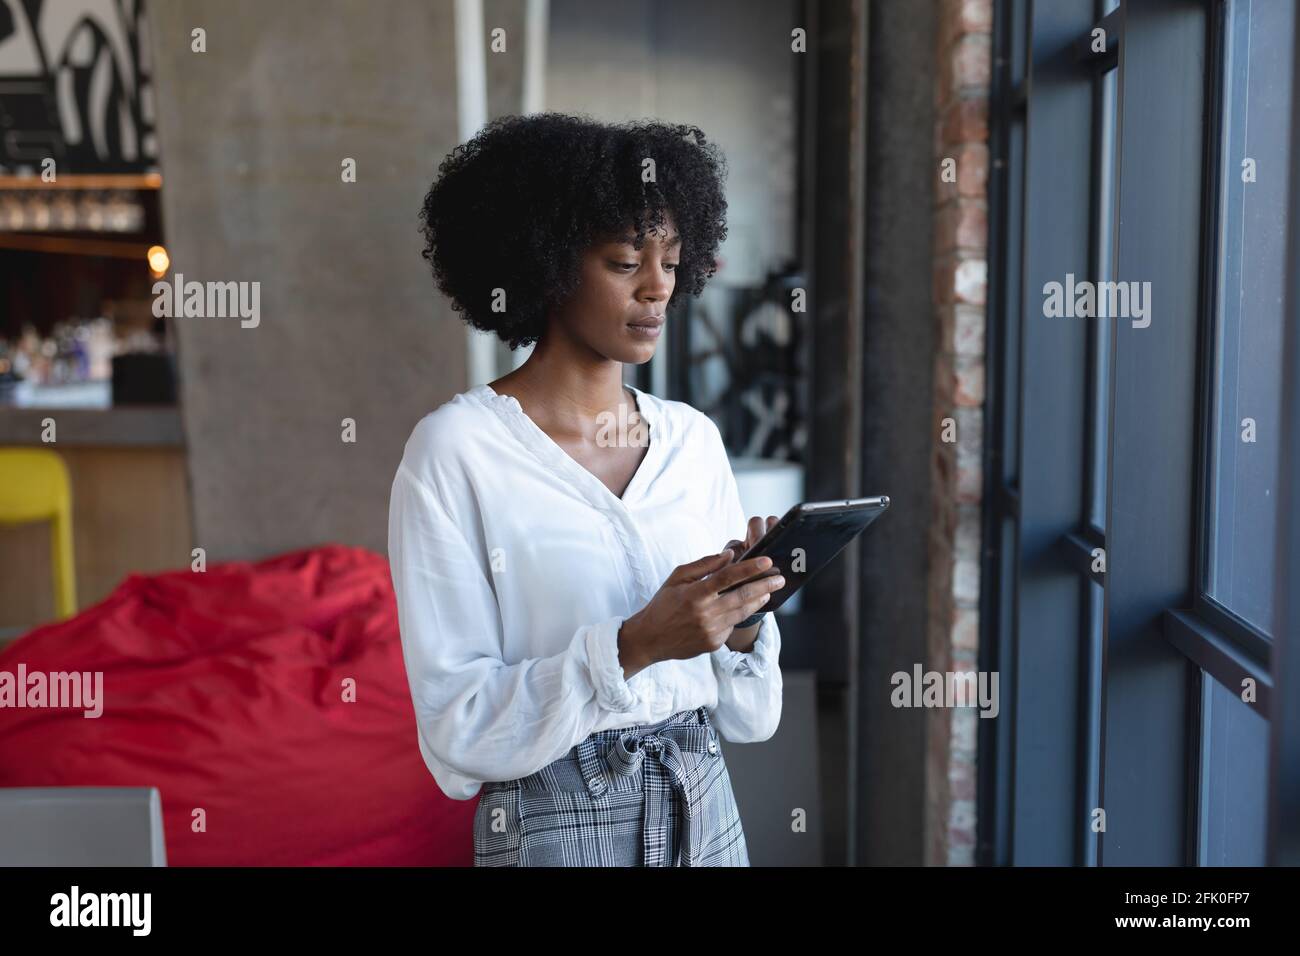 African american woman standing, using tablet and working in cafe Stock Photo